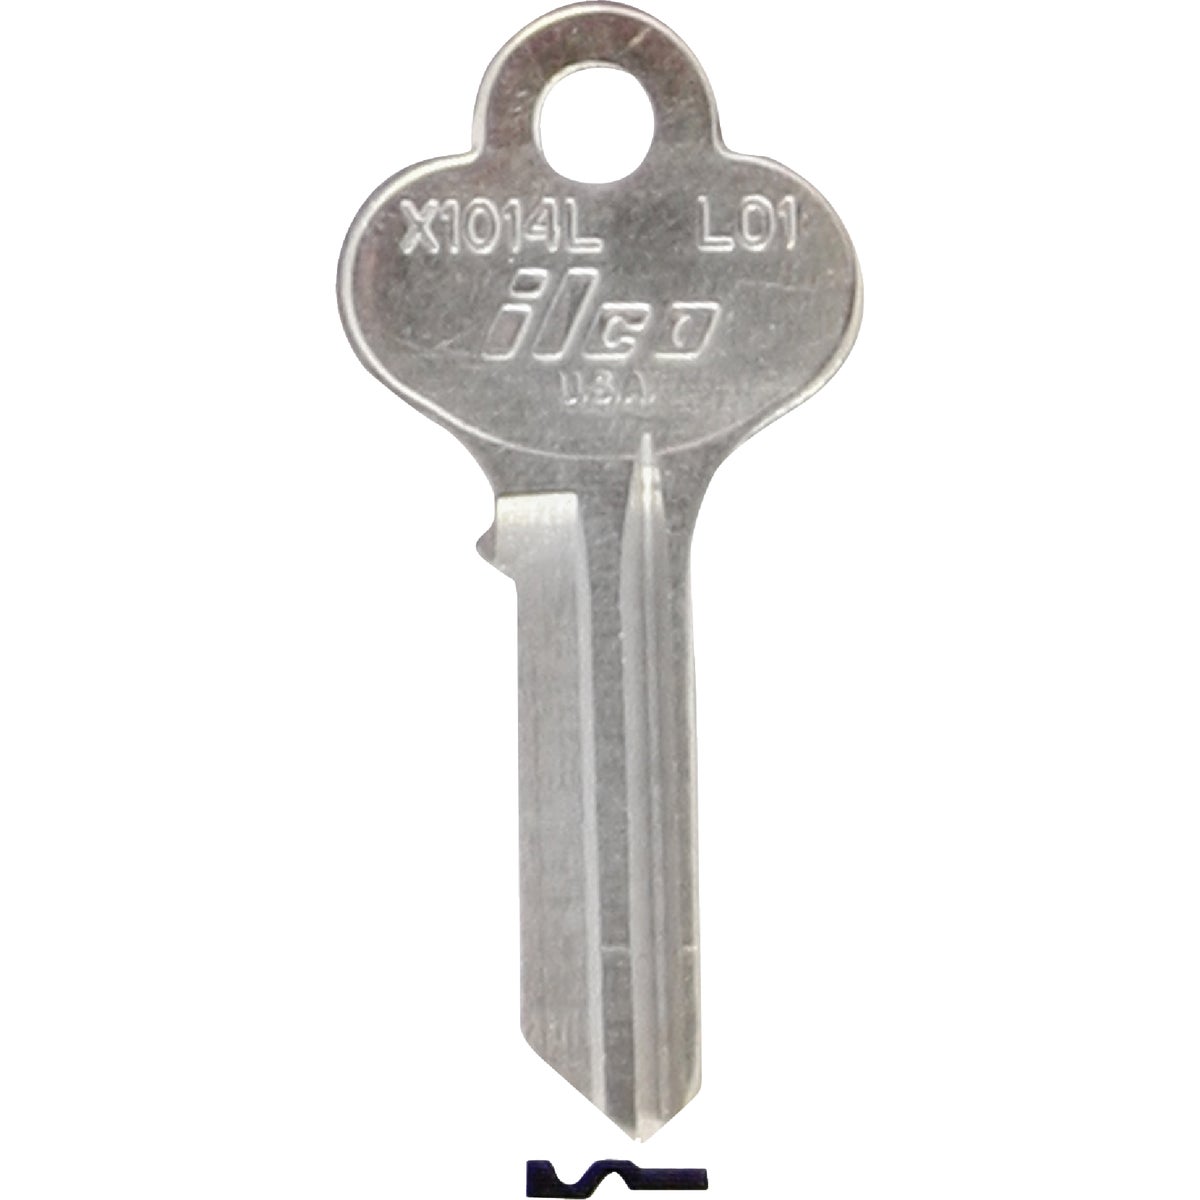 Item 223603, Nickel-plated key blank. When you order one, you will receive 10 keys.